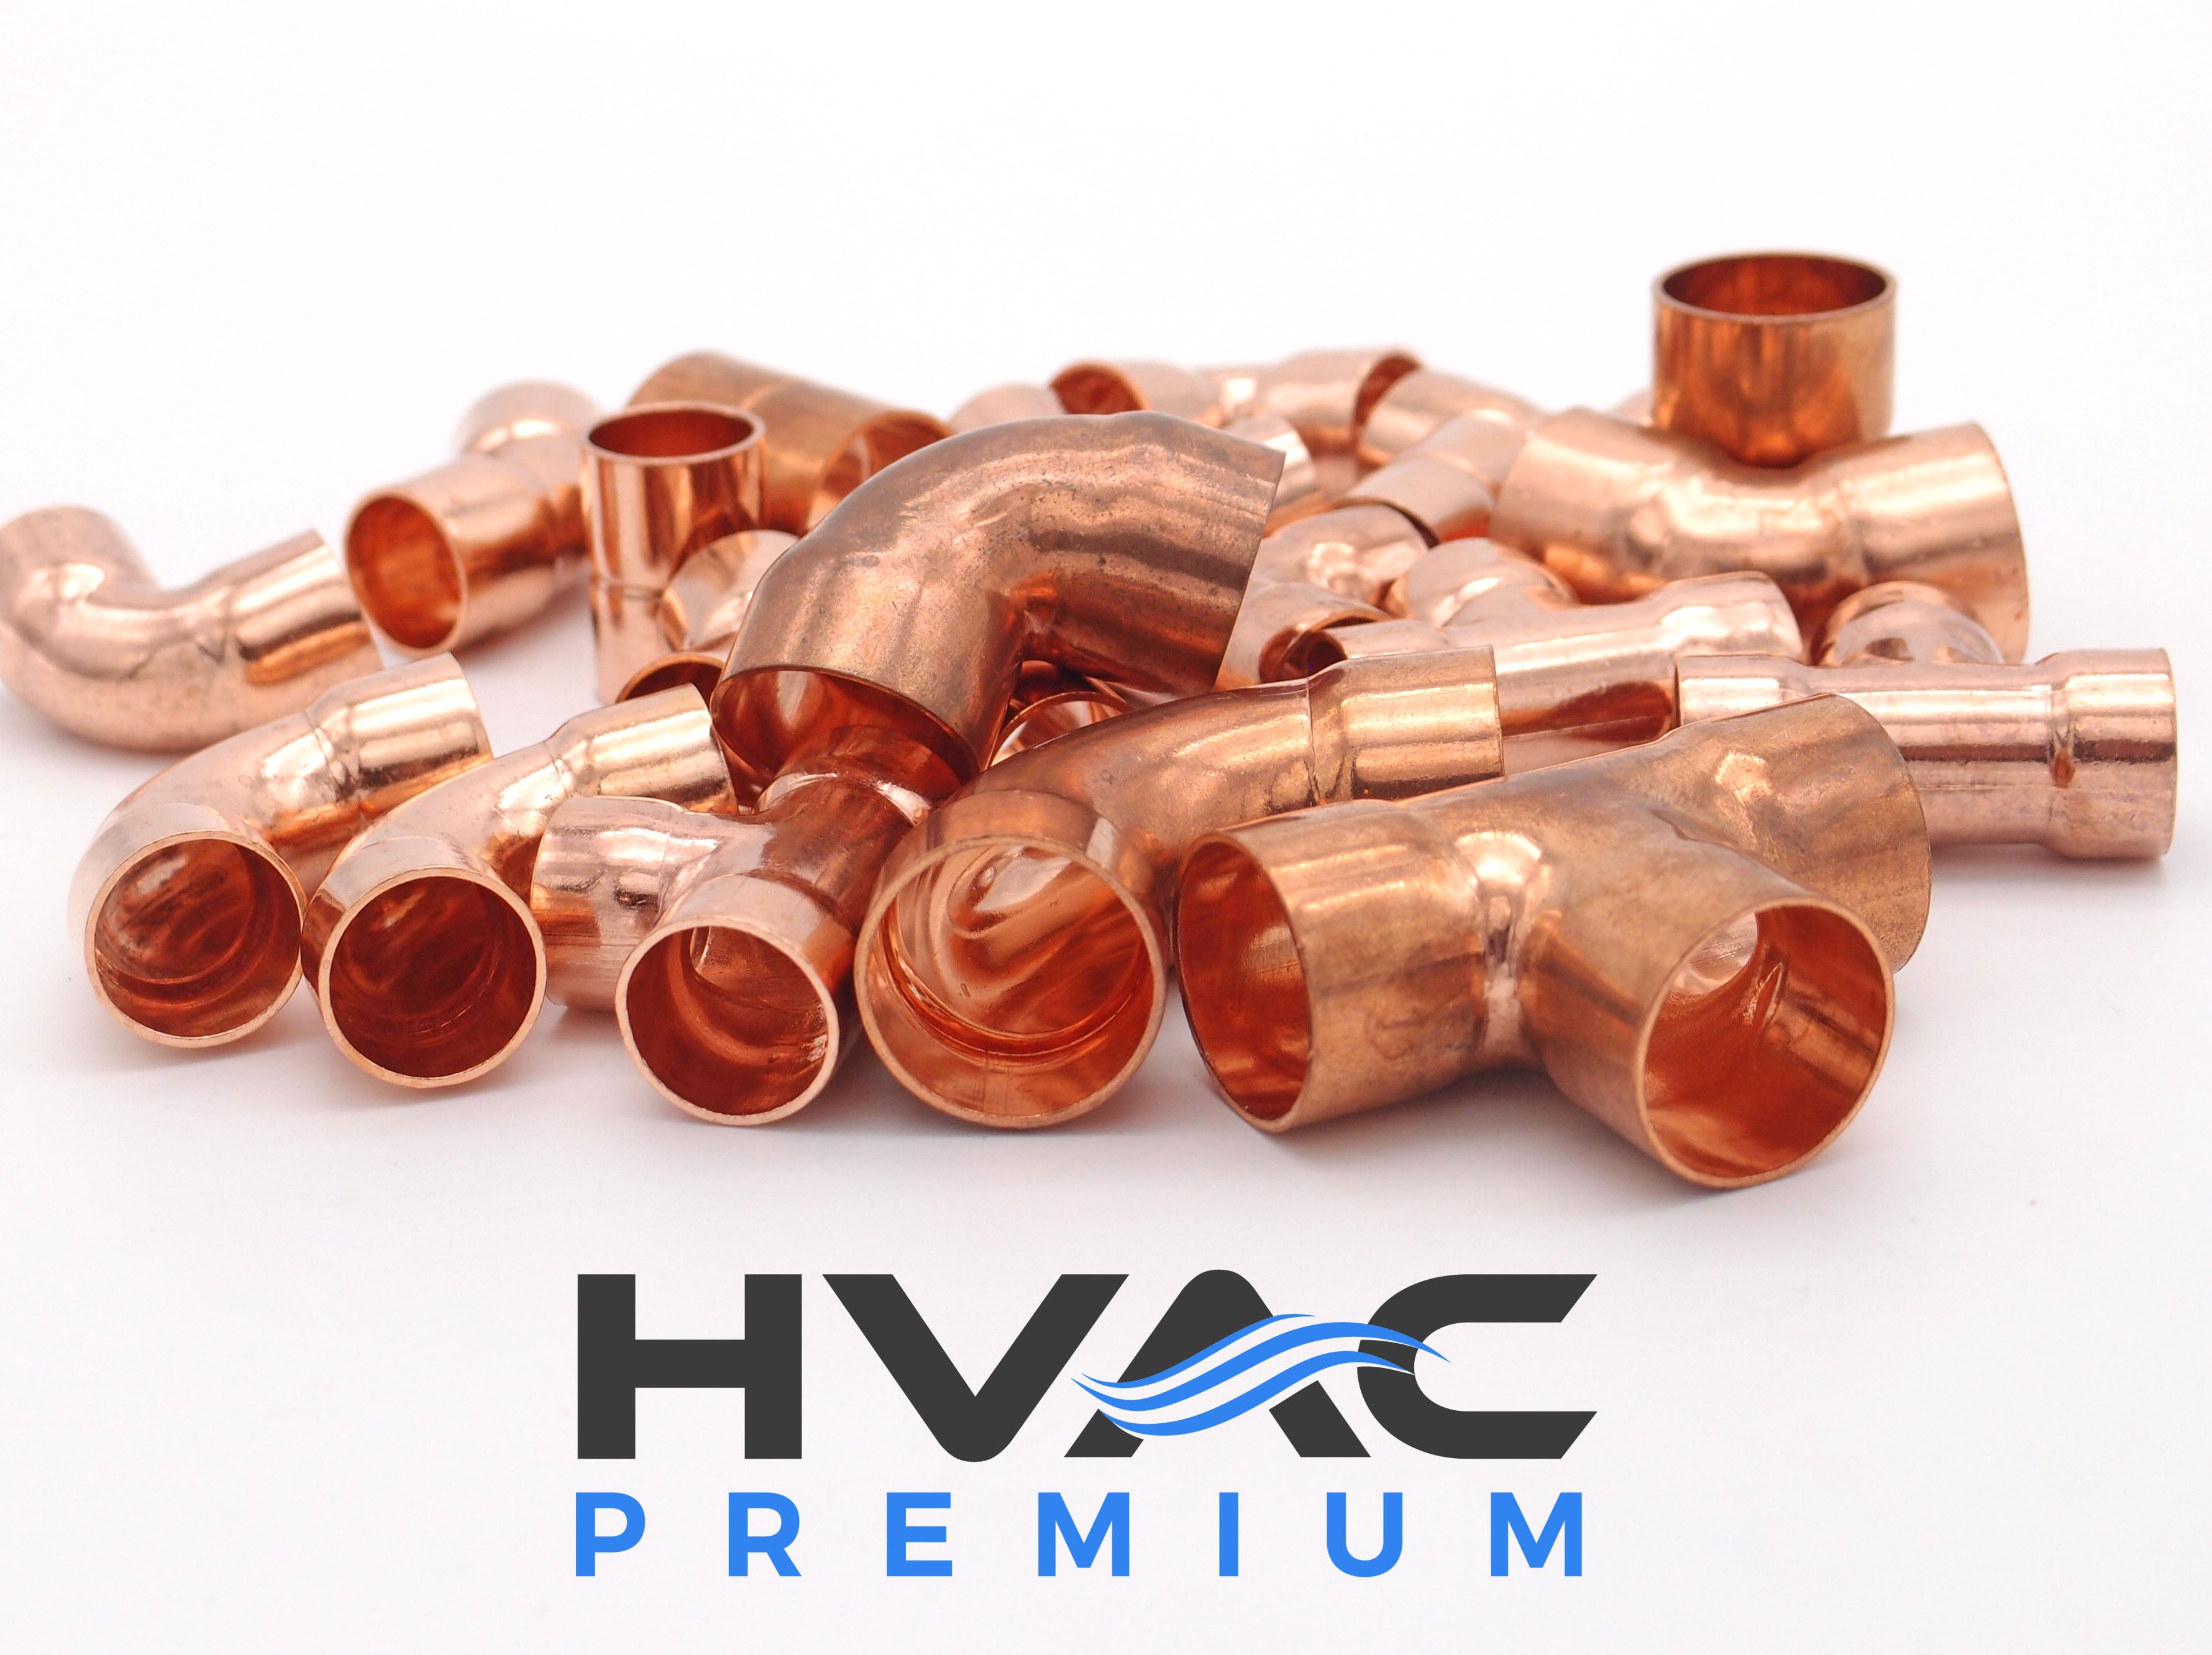 Copper Fitting 1-1/8 Inch (HVAC Outer Dimension) 1 Inch (Plumbing Inner Dimension) - Straight Copper Coupling Fittings With Rolled Tube Stop & HVAC – 99.9% Pure Copper - 10 Pack